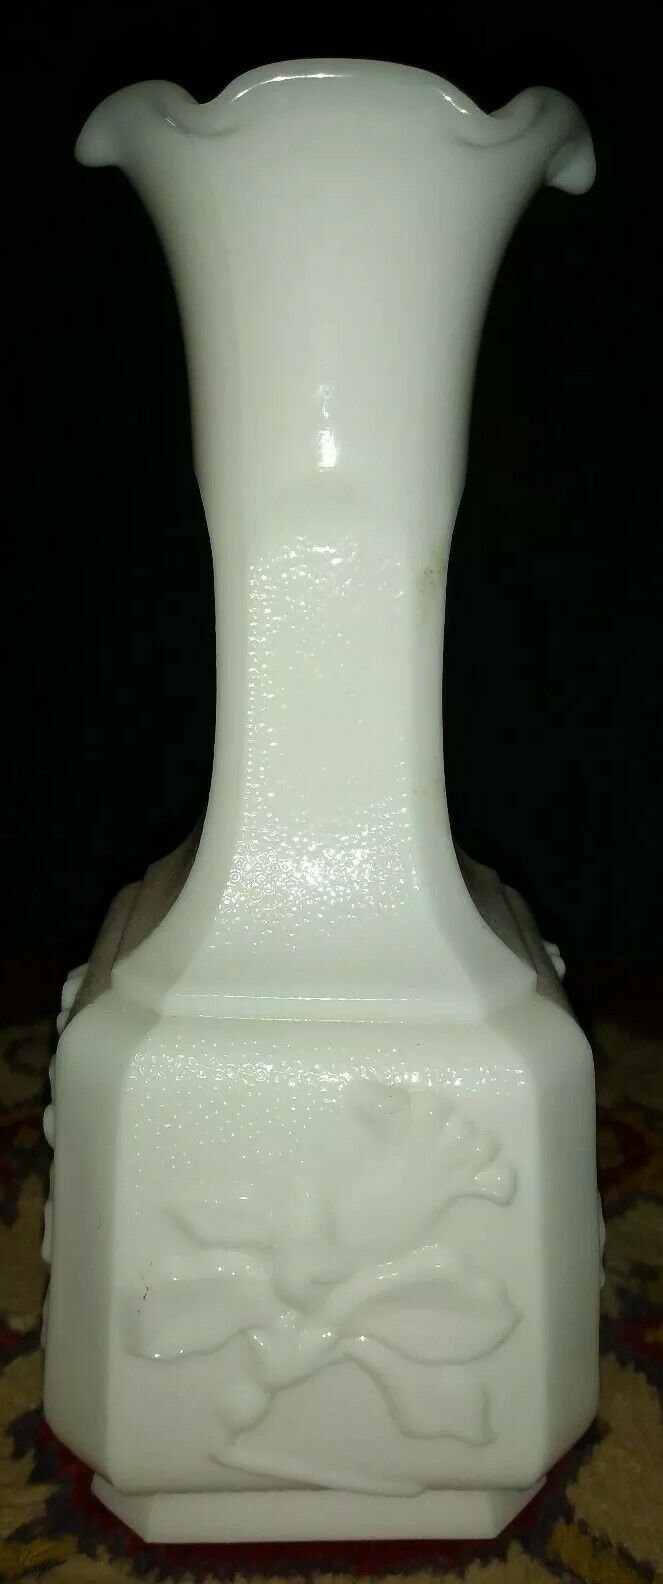 Imperial Jonquil Milk Glass Textured Vase 6 1/2" & In Perfect Condition!